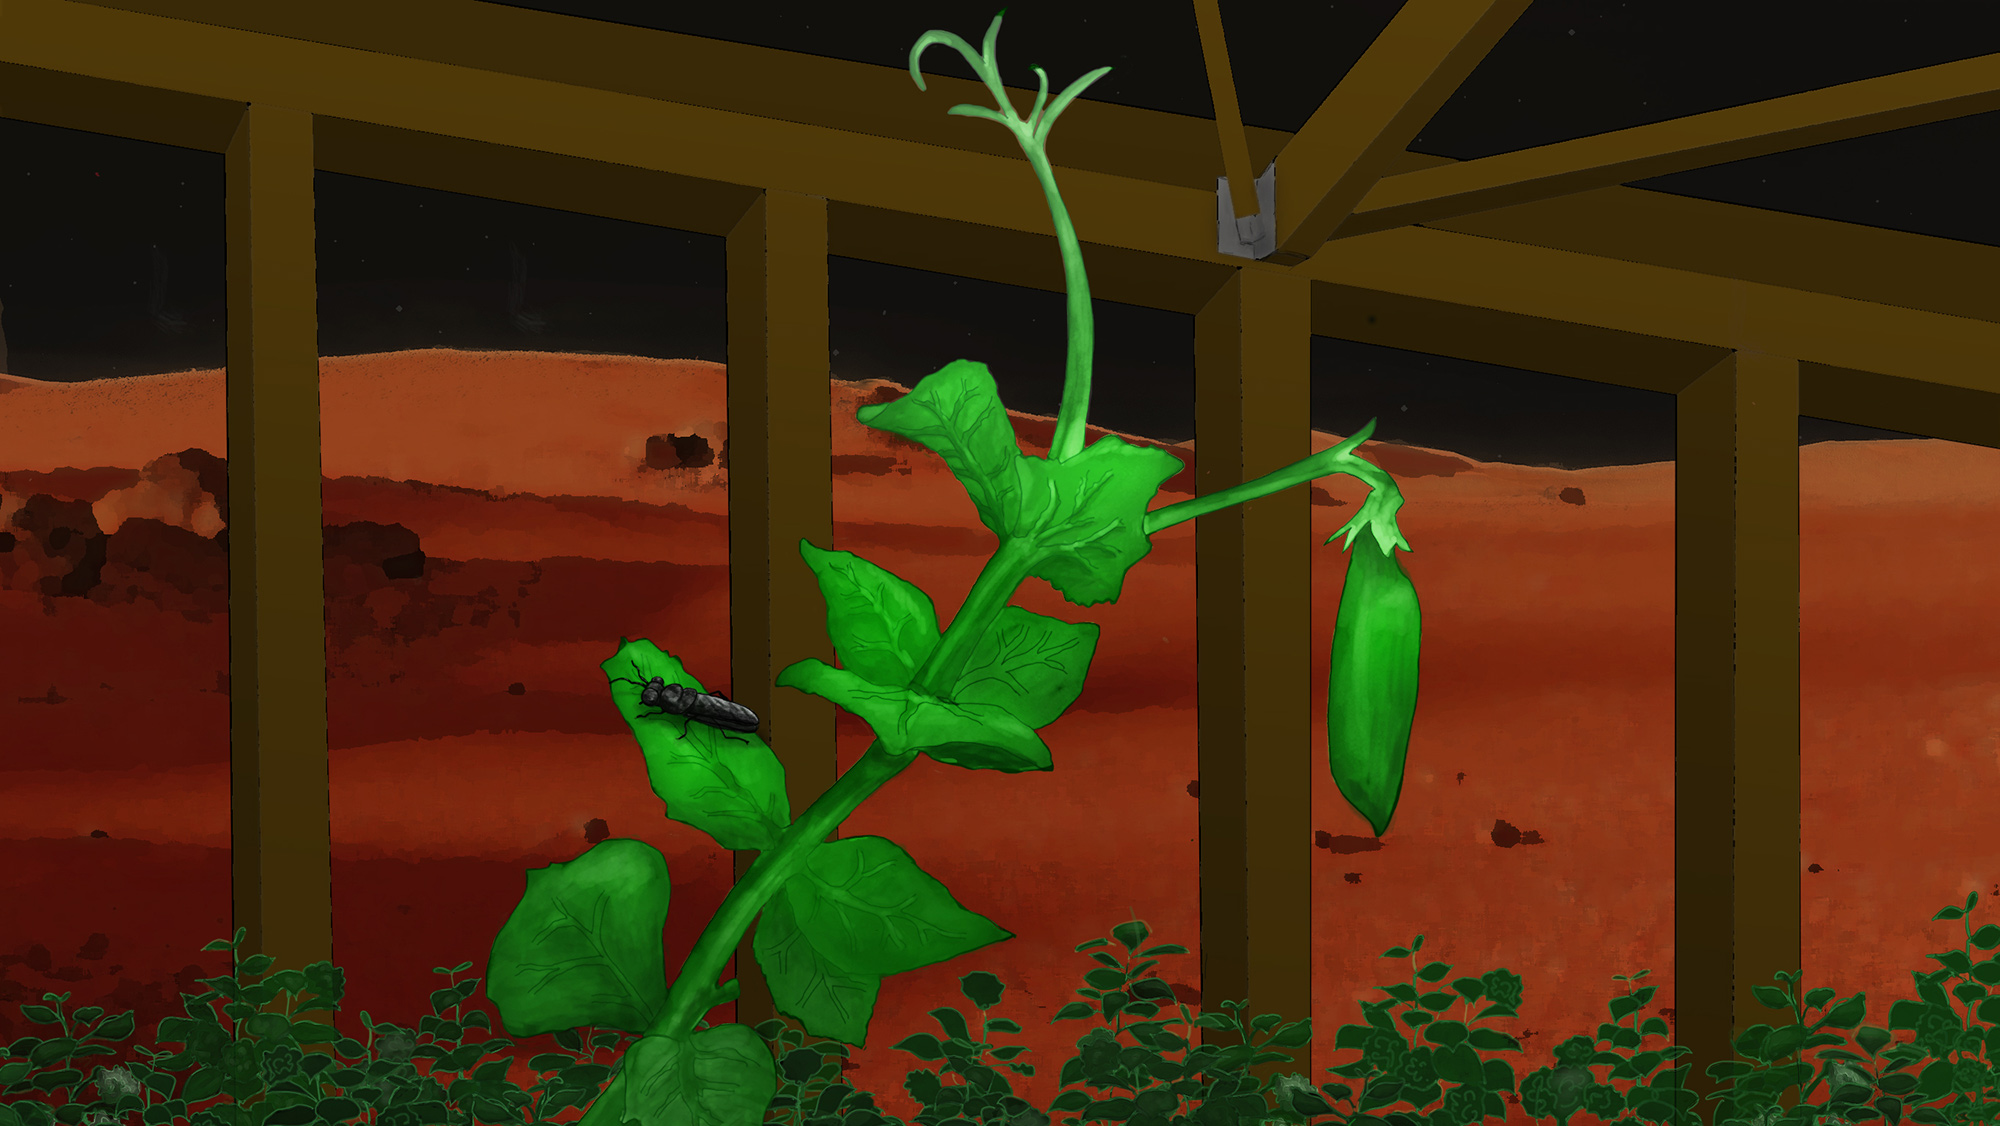 A graphic of a pea plant An illustration of a pea plant in a greenhouse on mars.